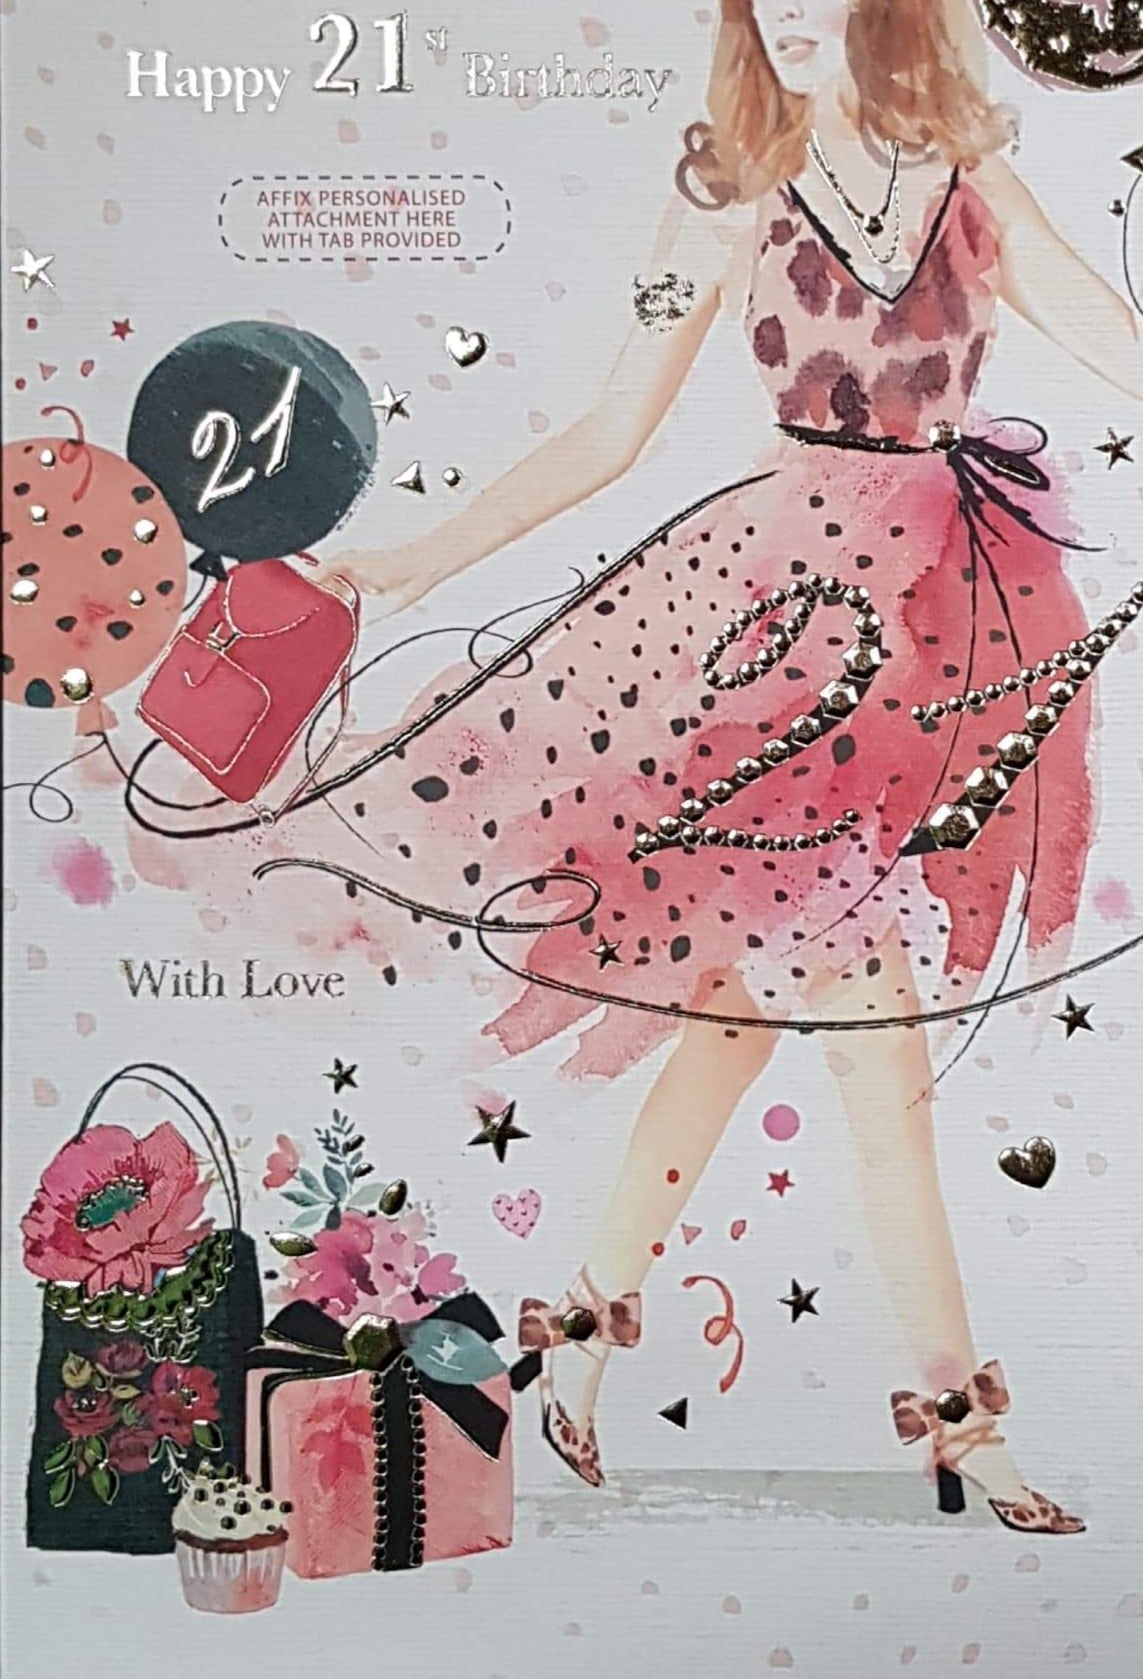 Personalised Card - Age 21 Birthday / A Lady In A Pink Dress & A Cupcake Beside Gift Bags